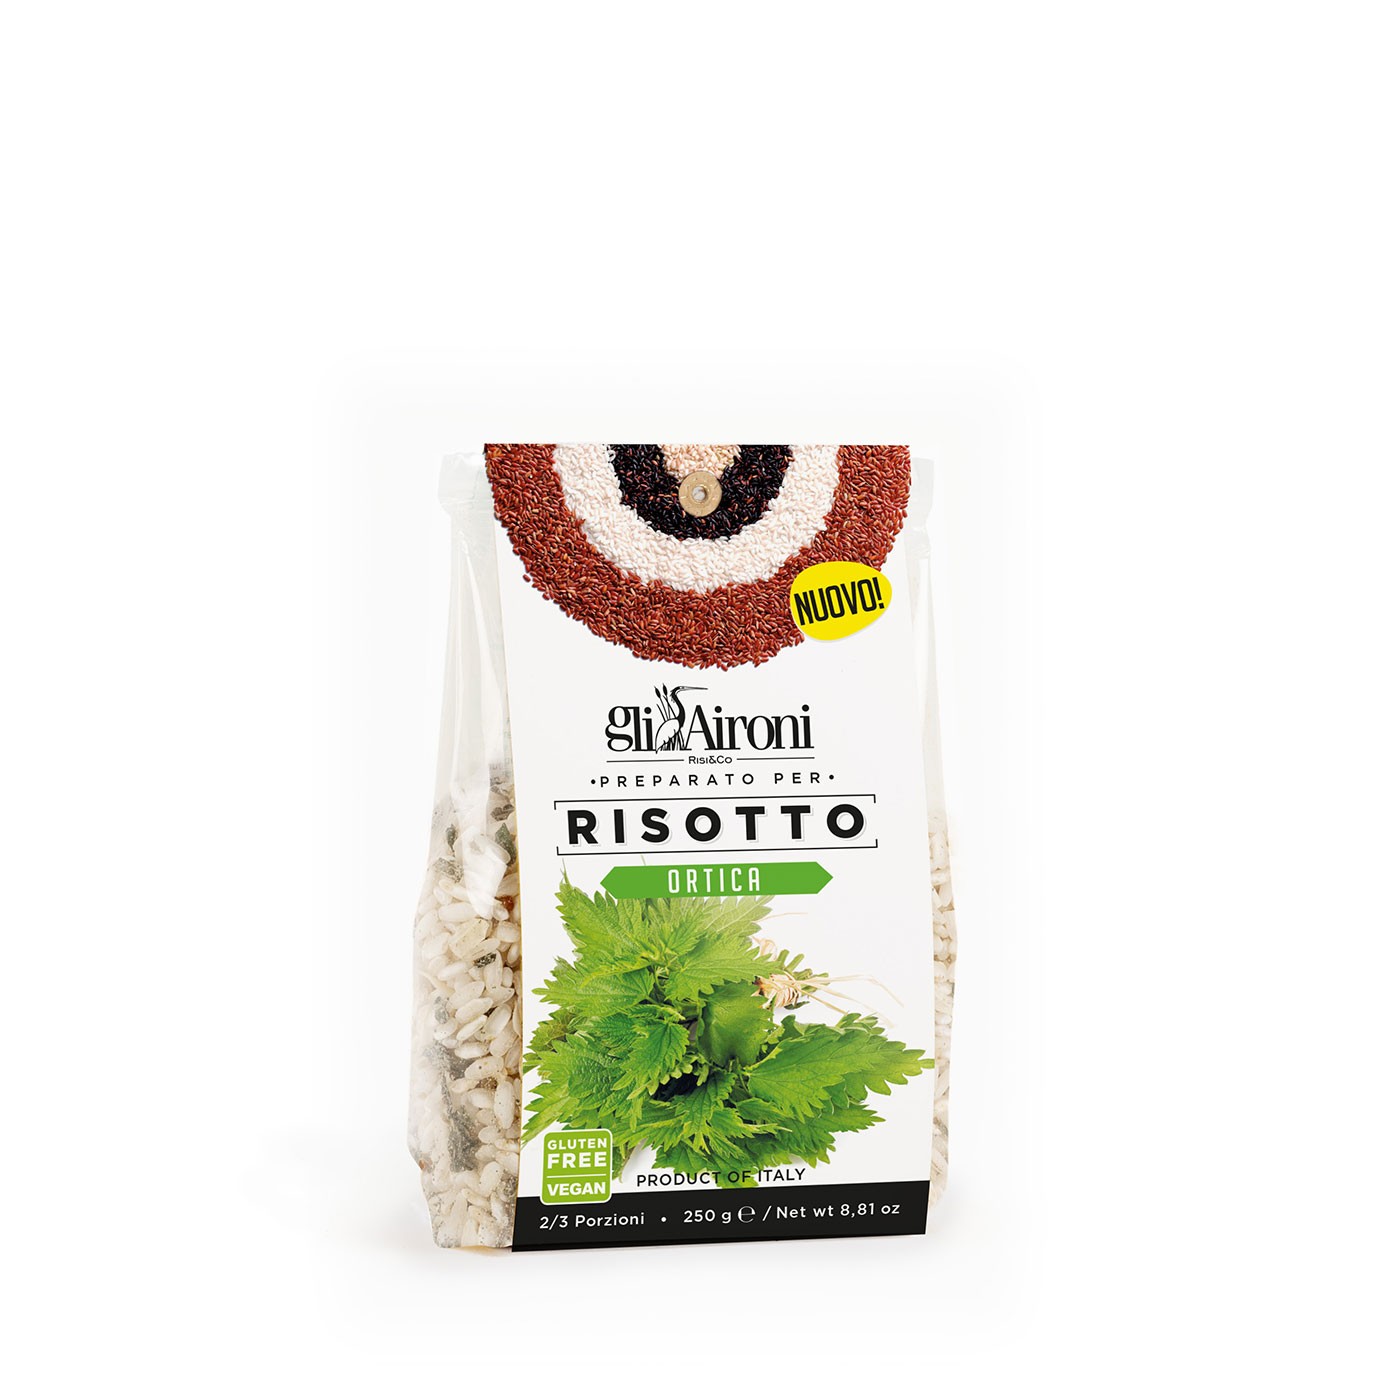 Nettle Risotto